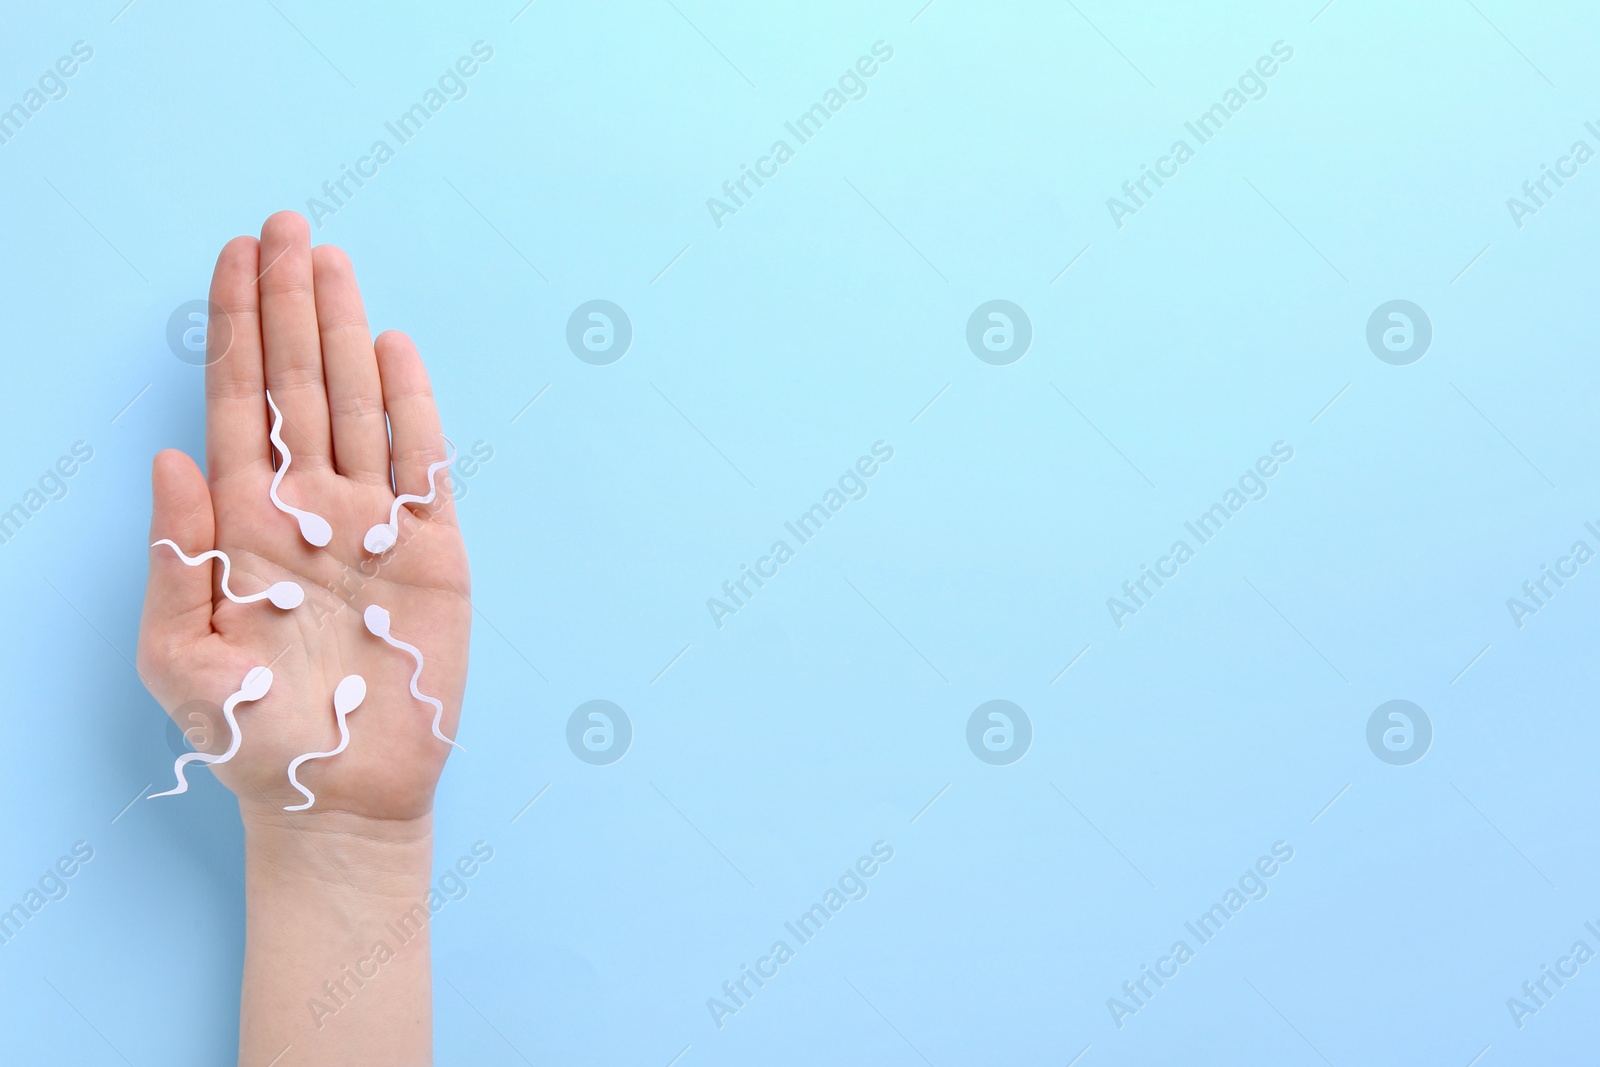 Photo of Reproductive medicine. Woman holding figures of sperm cells on light blue background, top view with space for text